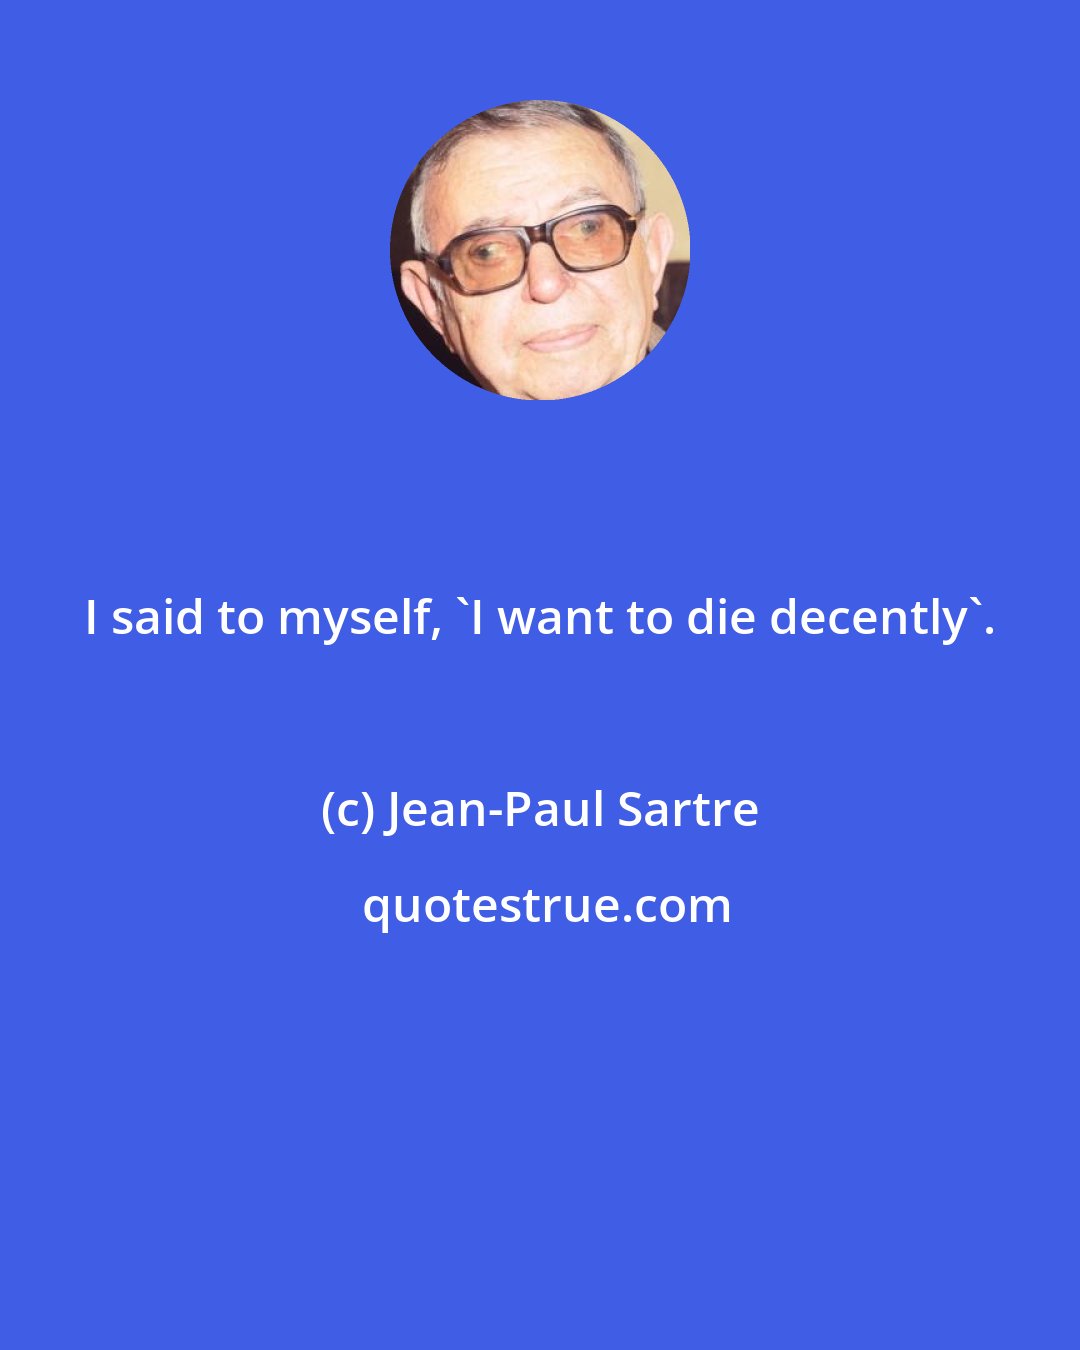 Jean-Paul Sartre: I said to myself, 'I want to die decently'.